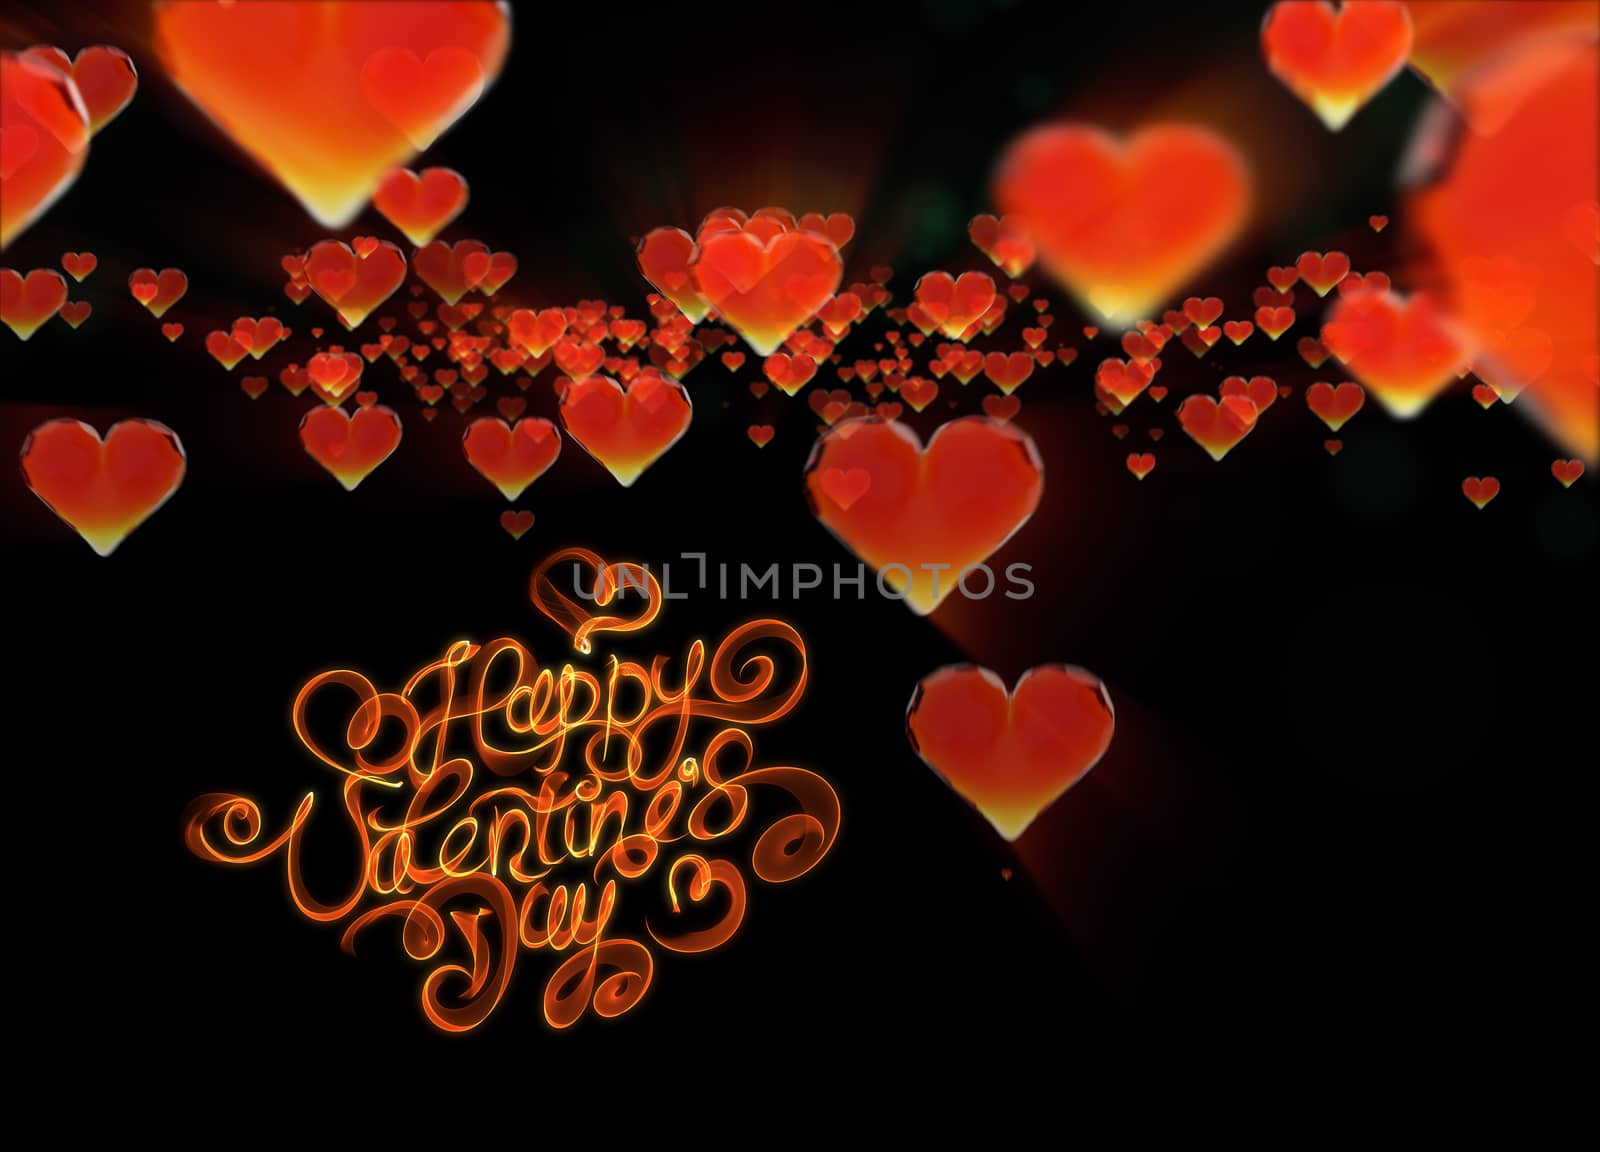 Happy valentines day lettering written by fire of smoke over black background.